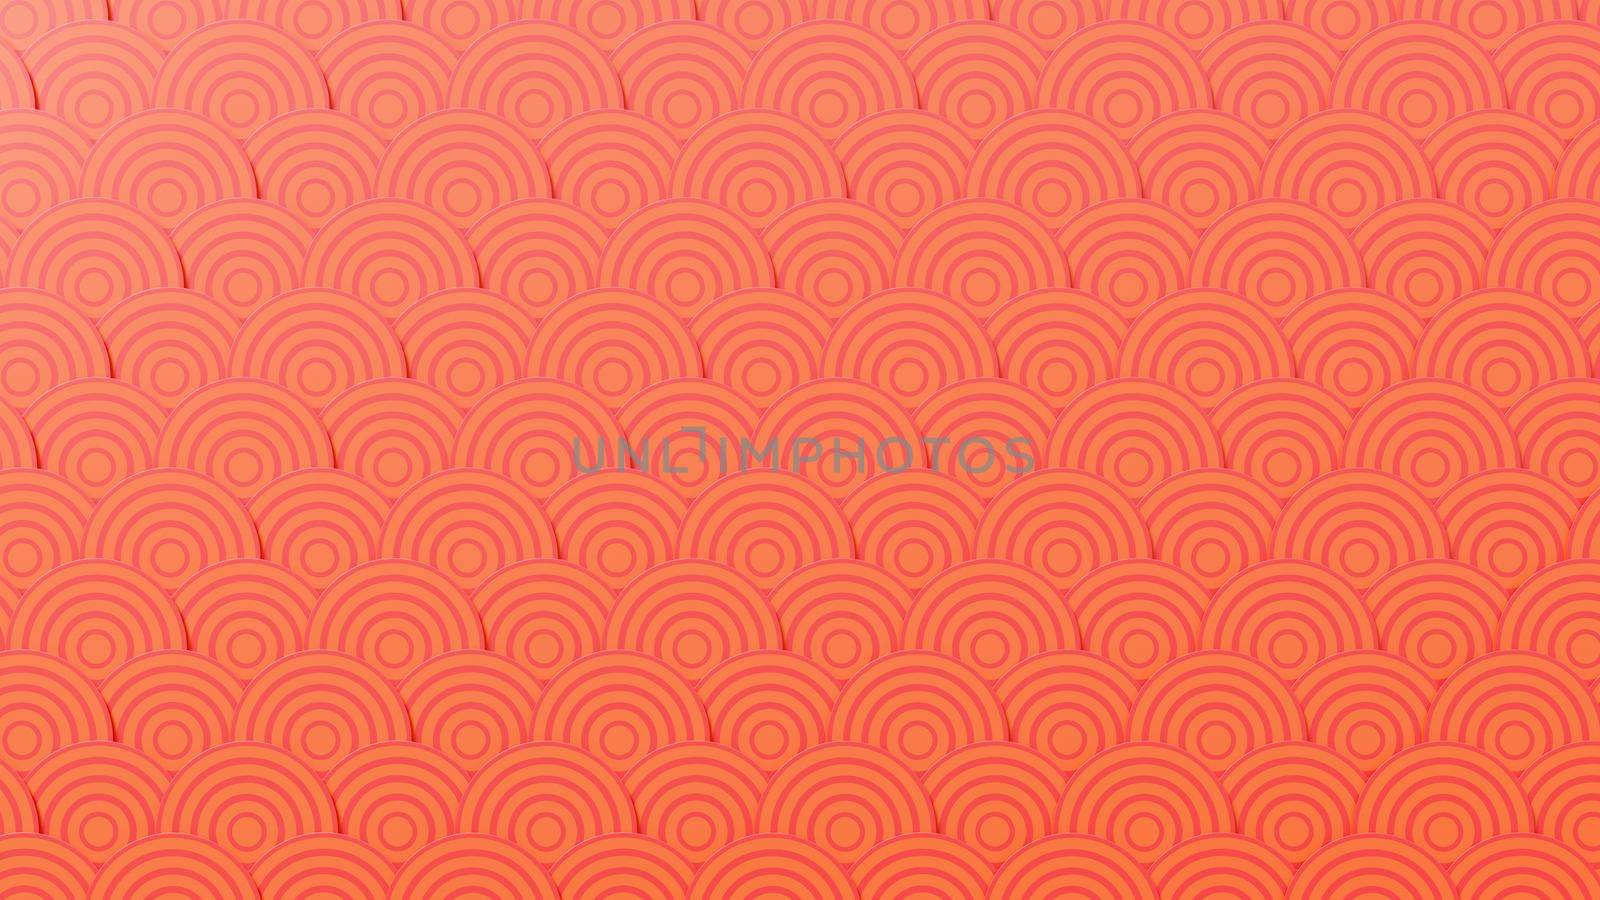 Happy Chinese new year concept. Chinese abstract seamless ocean wave pattern by Sorapop